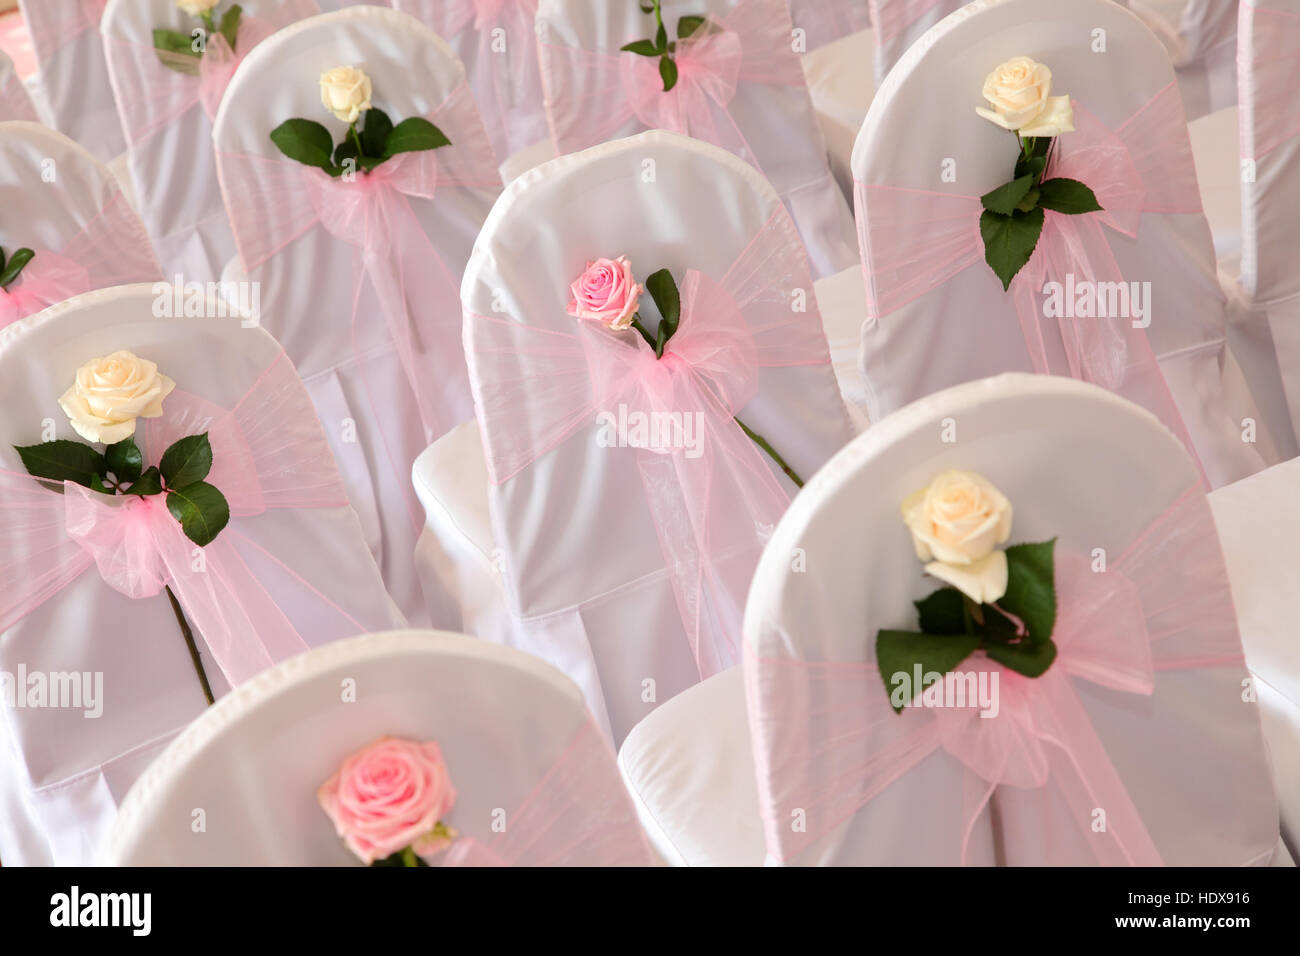 Chairs decorated with white covers, and pink and white roses, prepared for a wedding ceremony Stock Photo